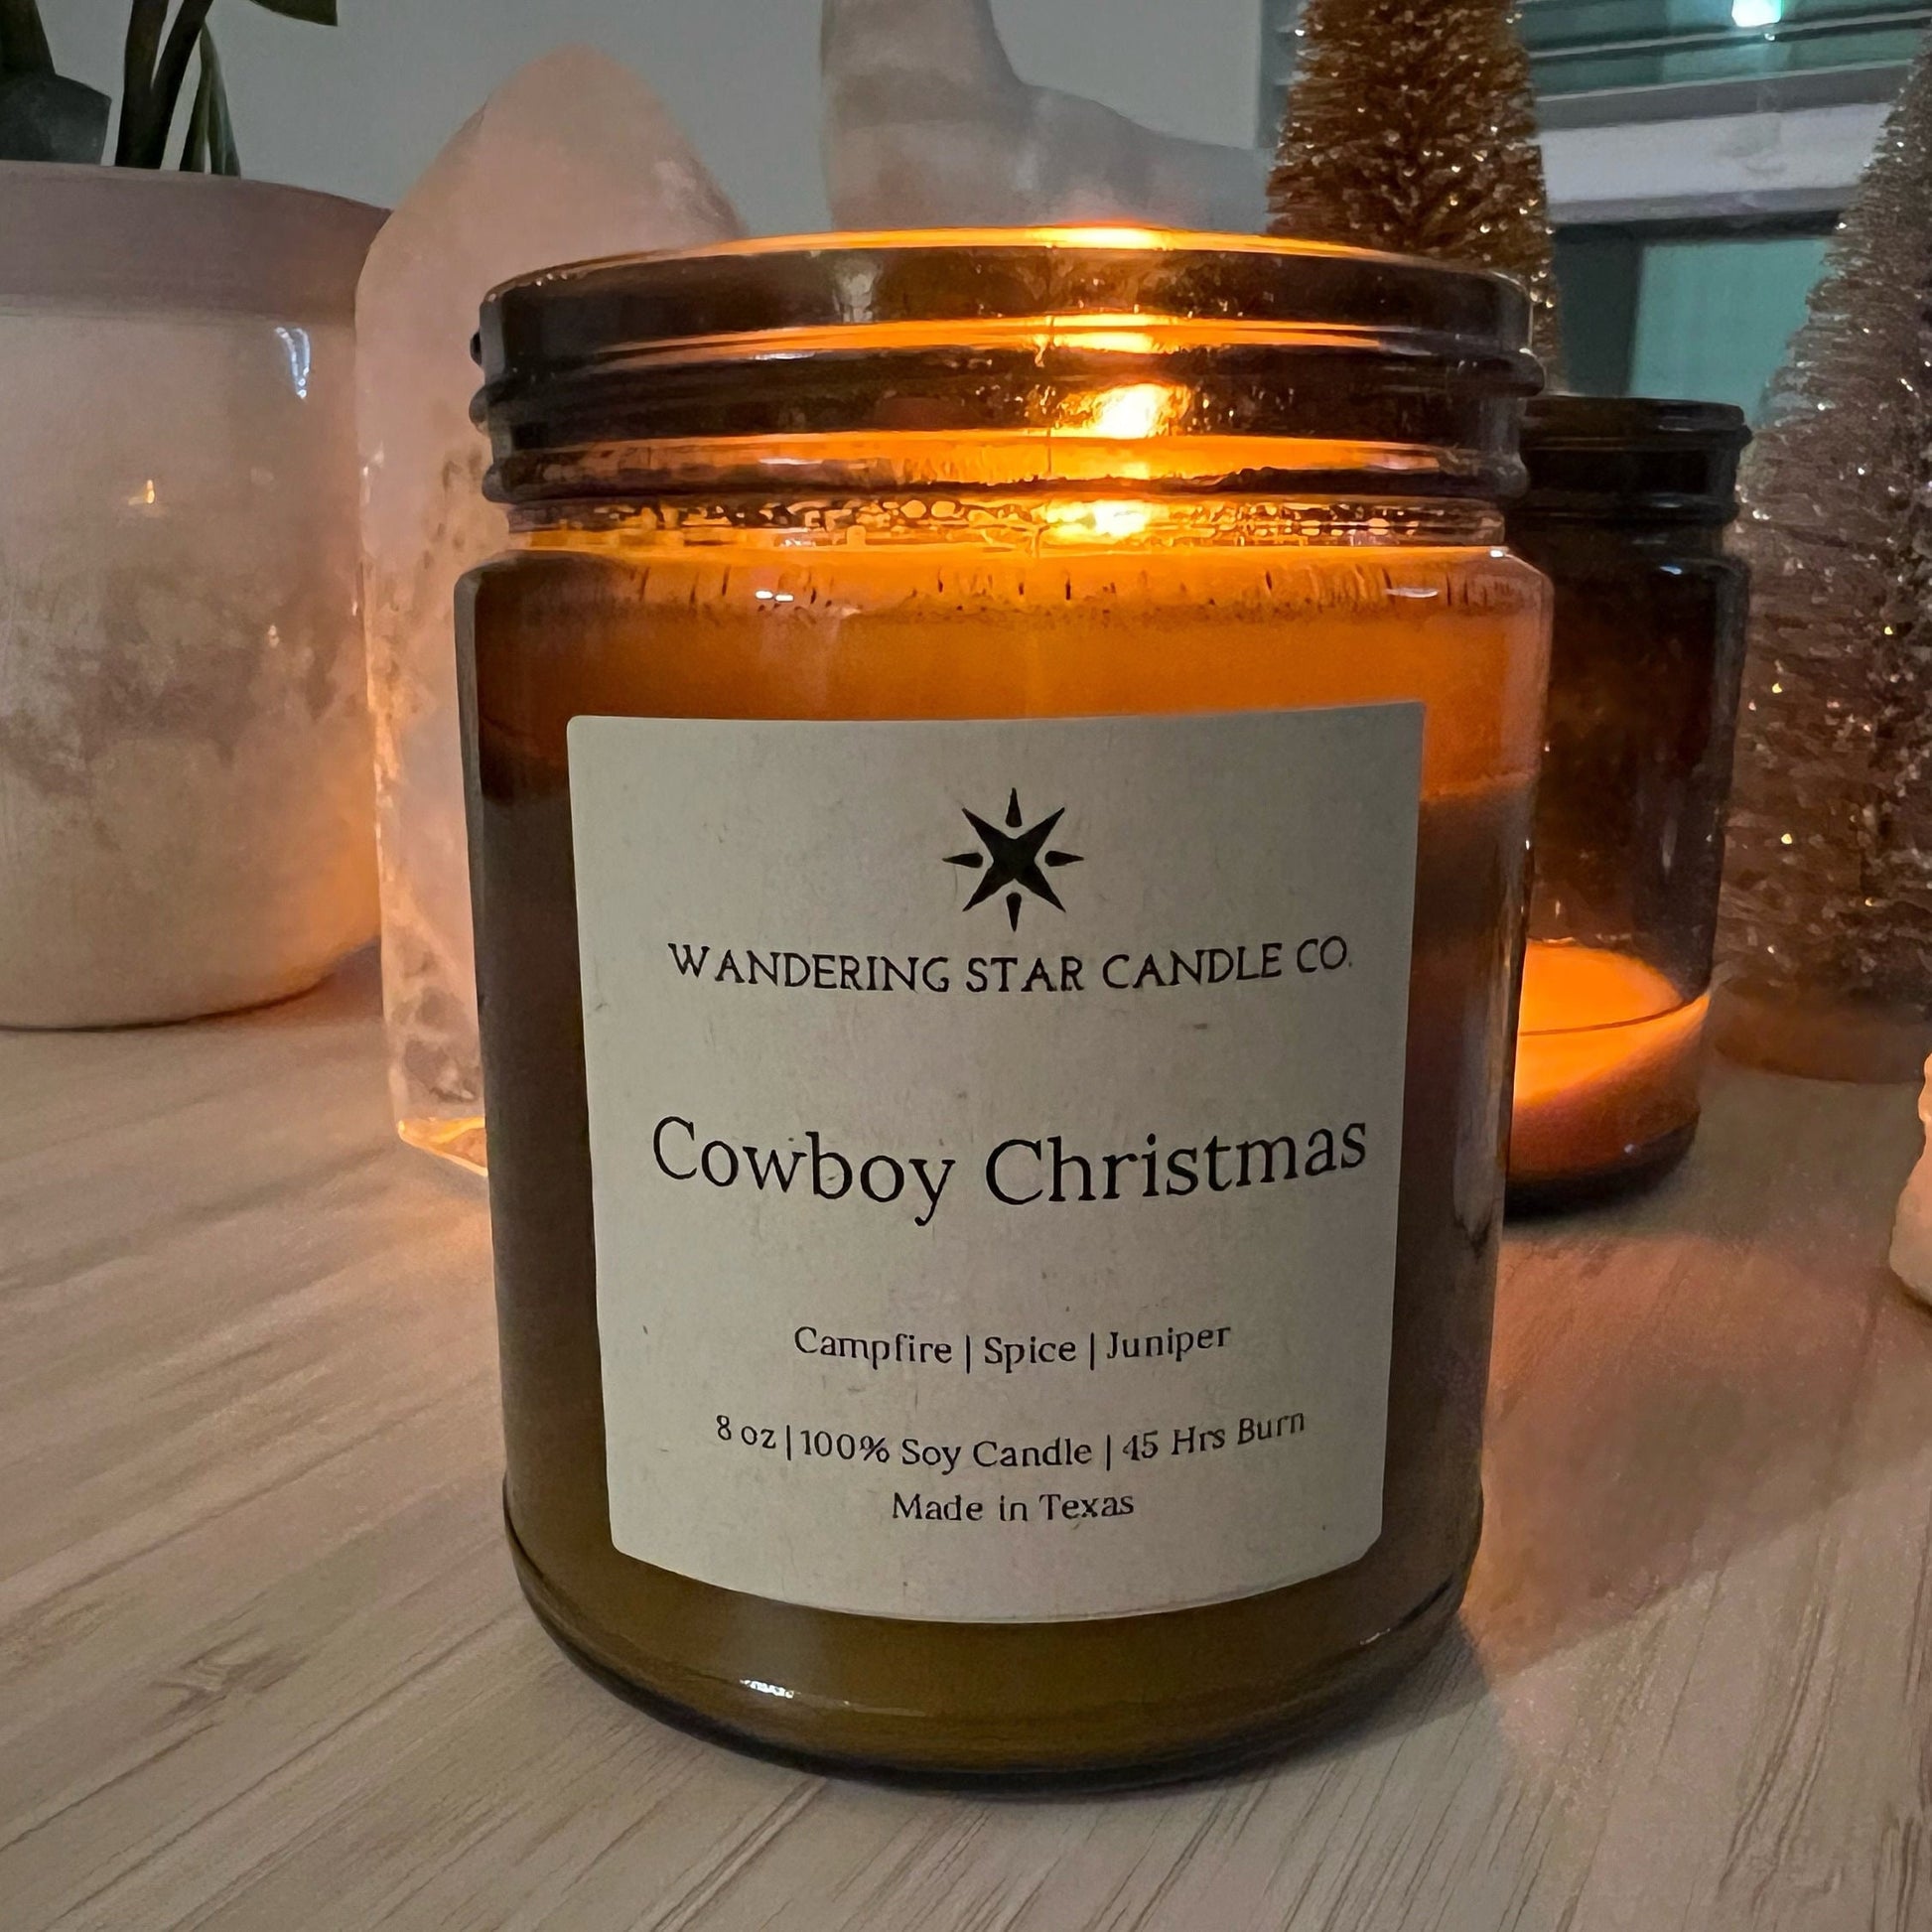 Photo of a lit amber jar candle featuring the scent of Cowboy Christmas, which is a blend of Campfire, Spice, and Juniper.